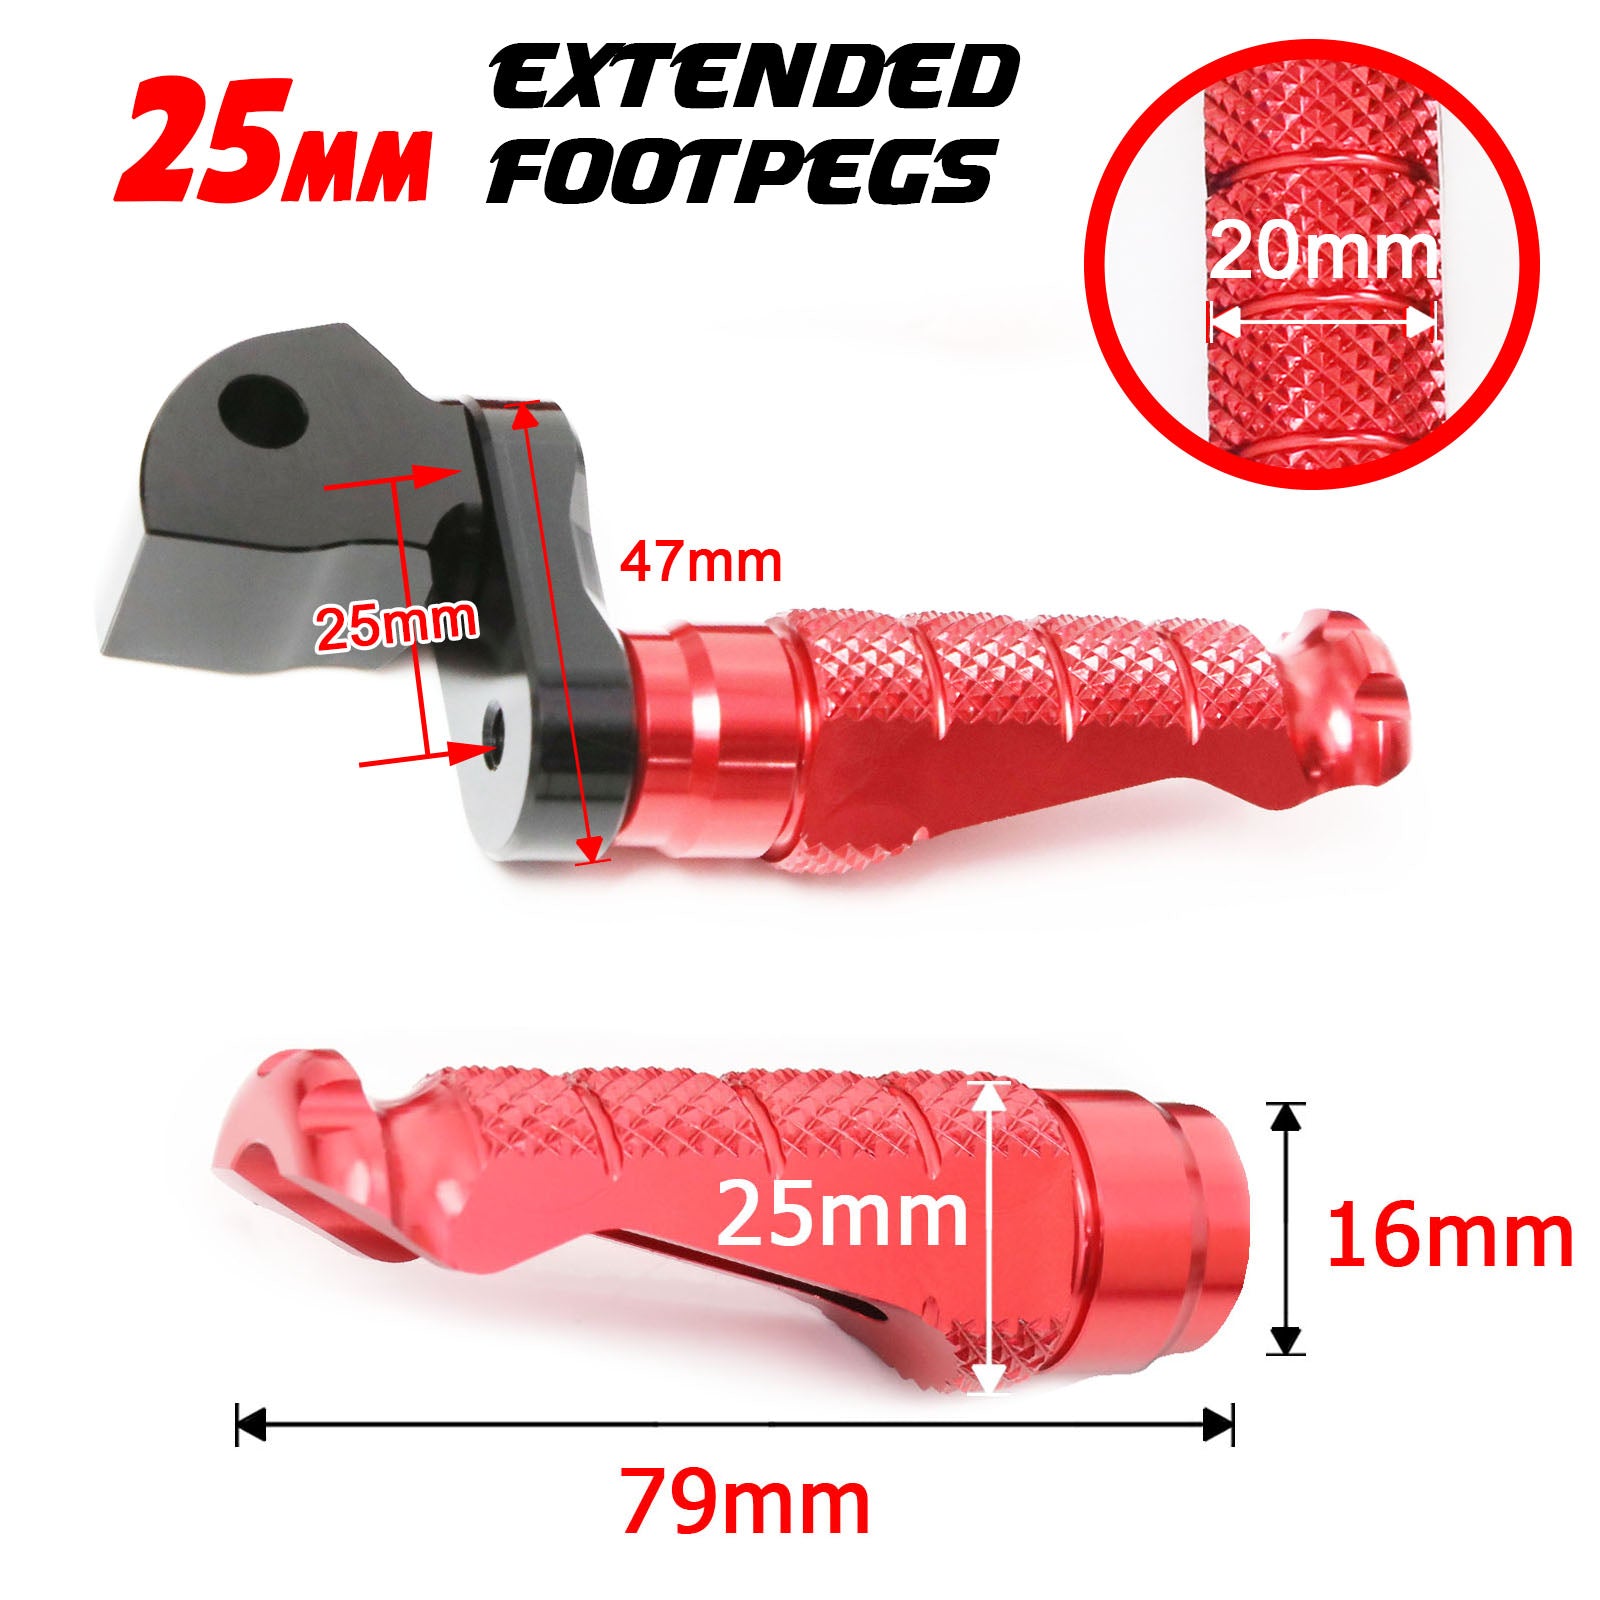 Fits Yamaha XMAX TMAX 530 25mm Adjustable Rear R-FIGHT Red Foot Pegs